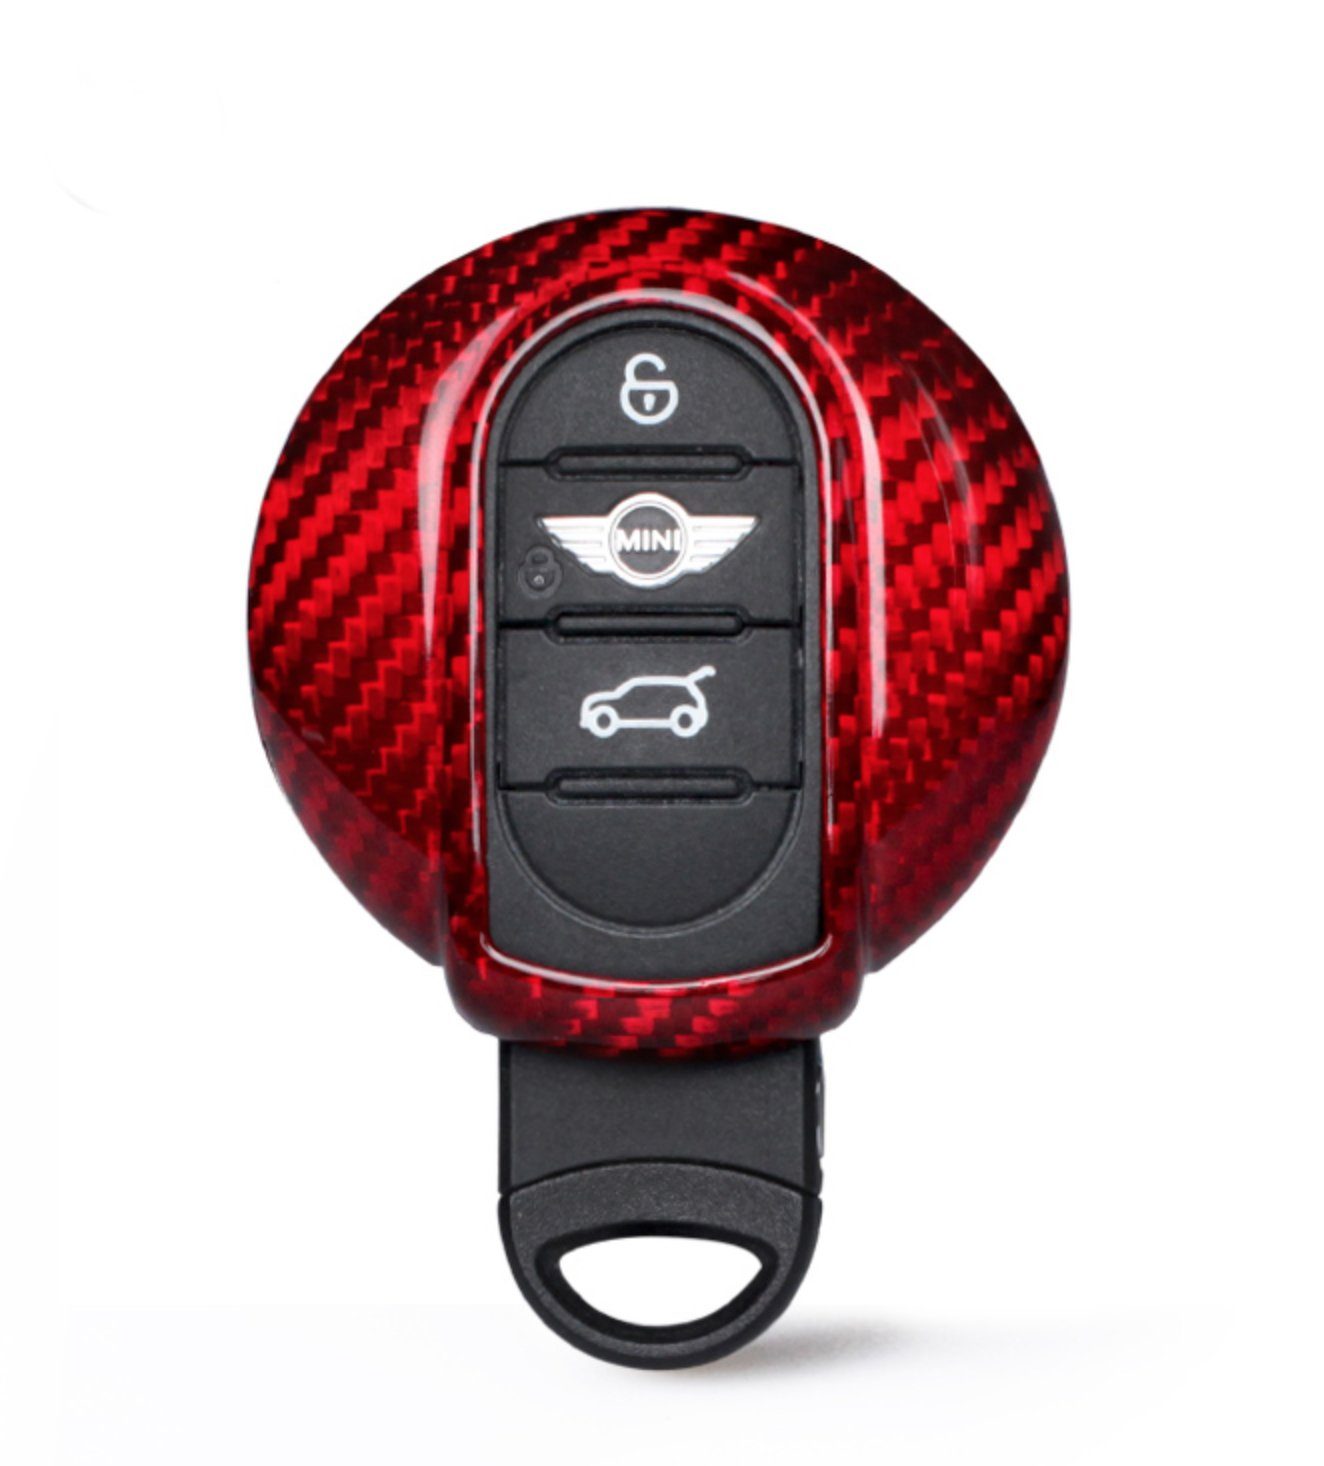 Pinalloy Red Carbon Fiber Remote Key Cover Case for BMW Mini F54 F56 F55 F57 F60 - Pinalloy Online Auto Accessories Lightweight Car Kit 